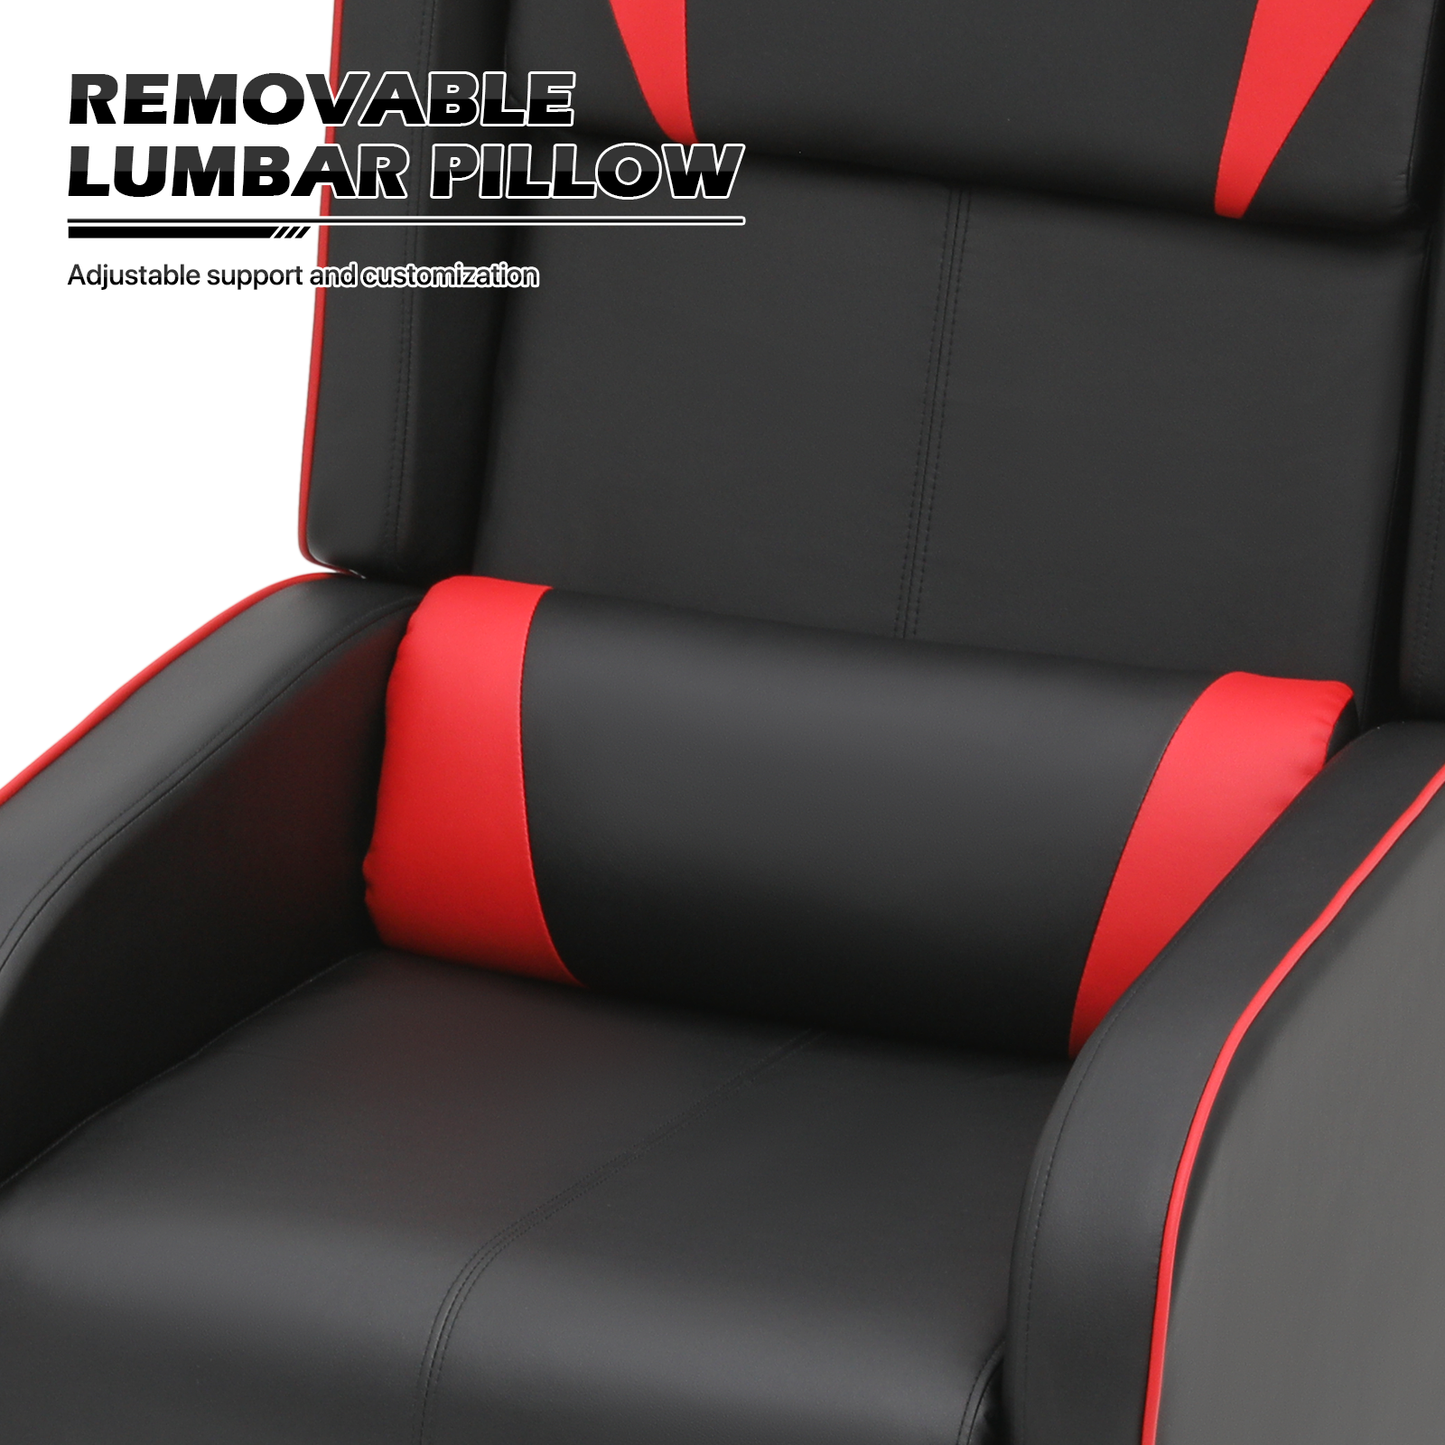 Single Sofa - Reclinable Gaming Chair - PU Leather Seat